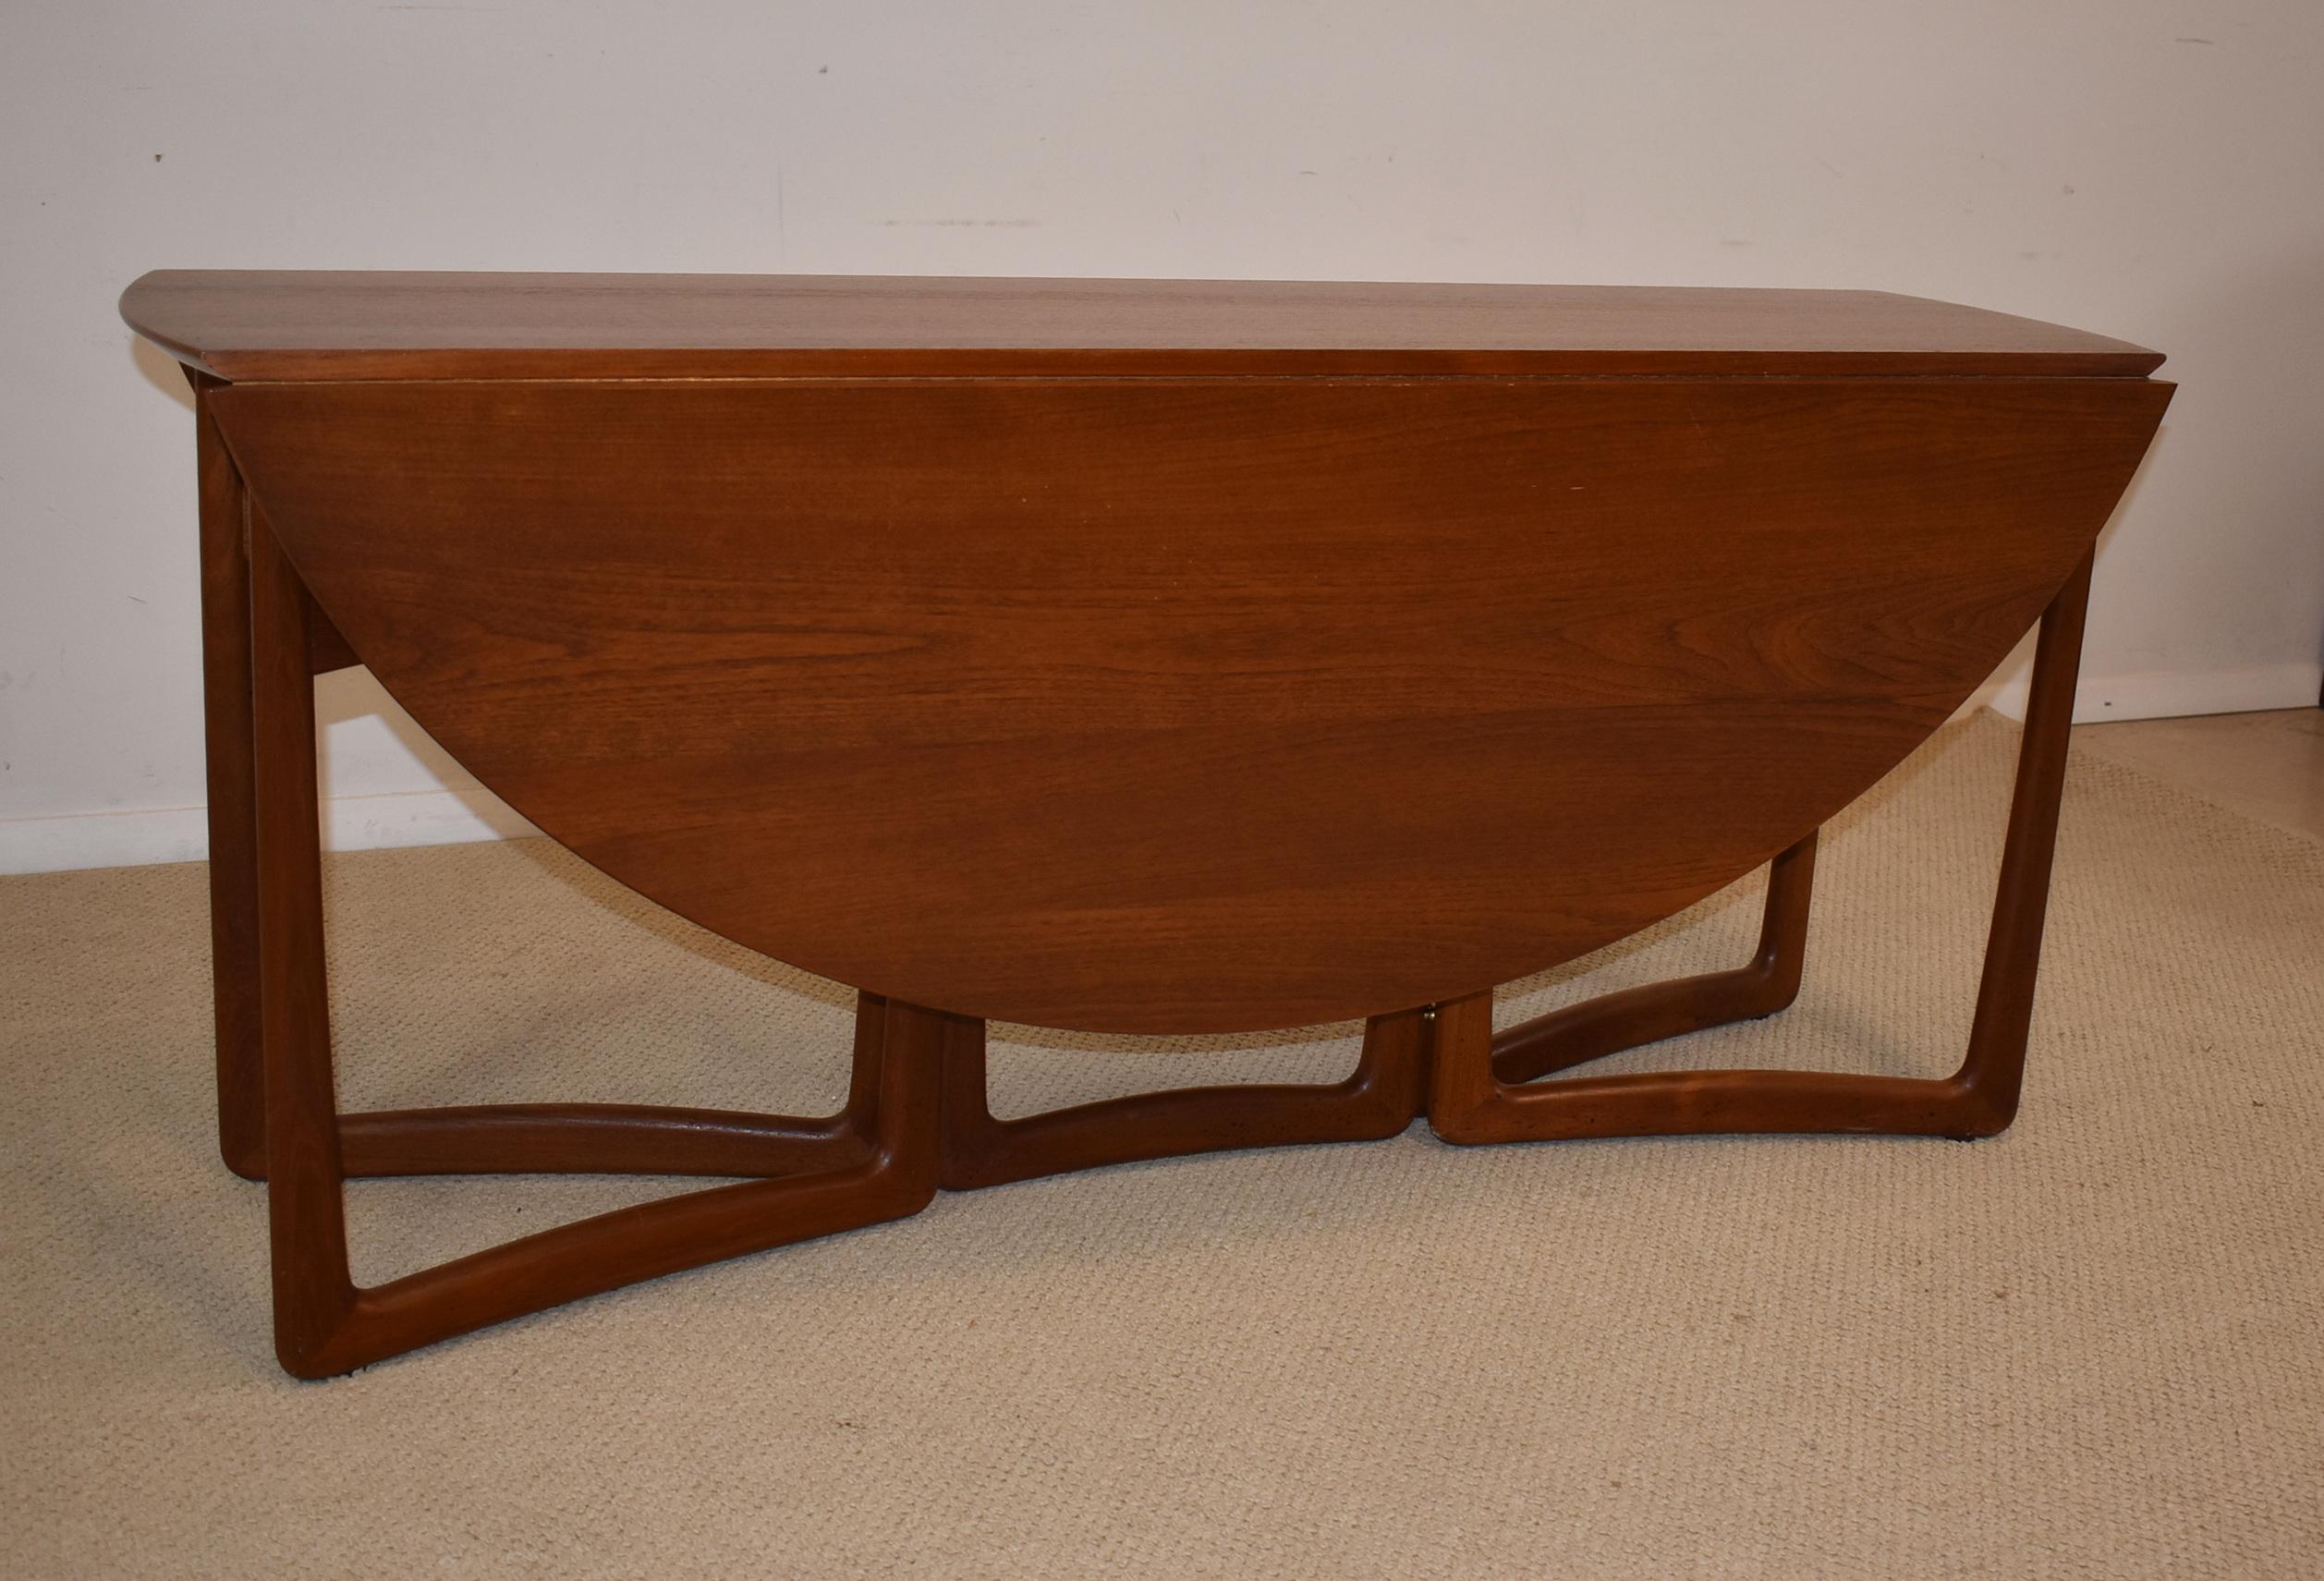 Danish drop-leaf dining table designed by Peter Hvidt and Orla Mølgaard-Nielsen. Table is solid teak wood with brass details, and is in excellent vintage condition. Manufacturer John Stuart, New York label on the bottom, 1950s. Measures: Closed 64